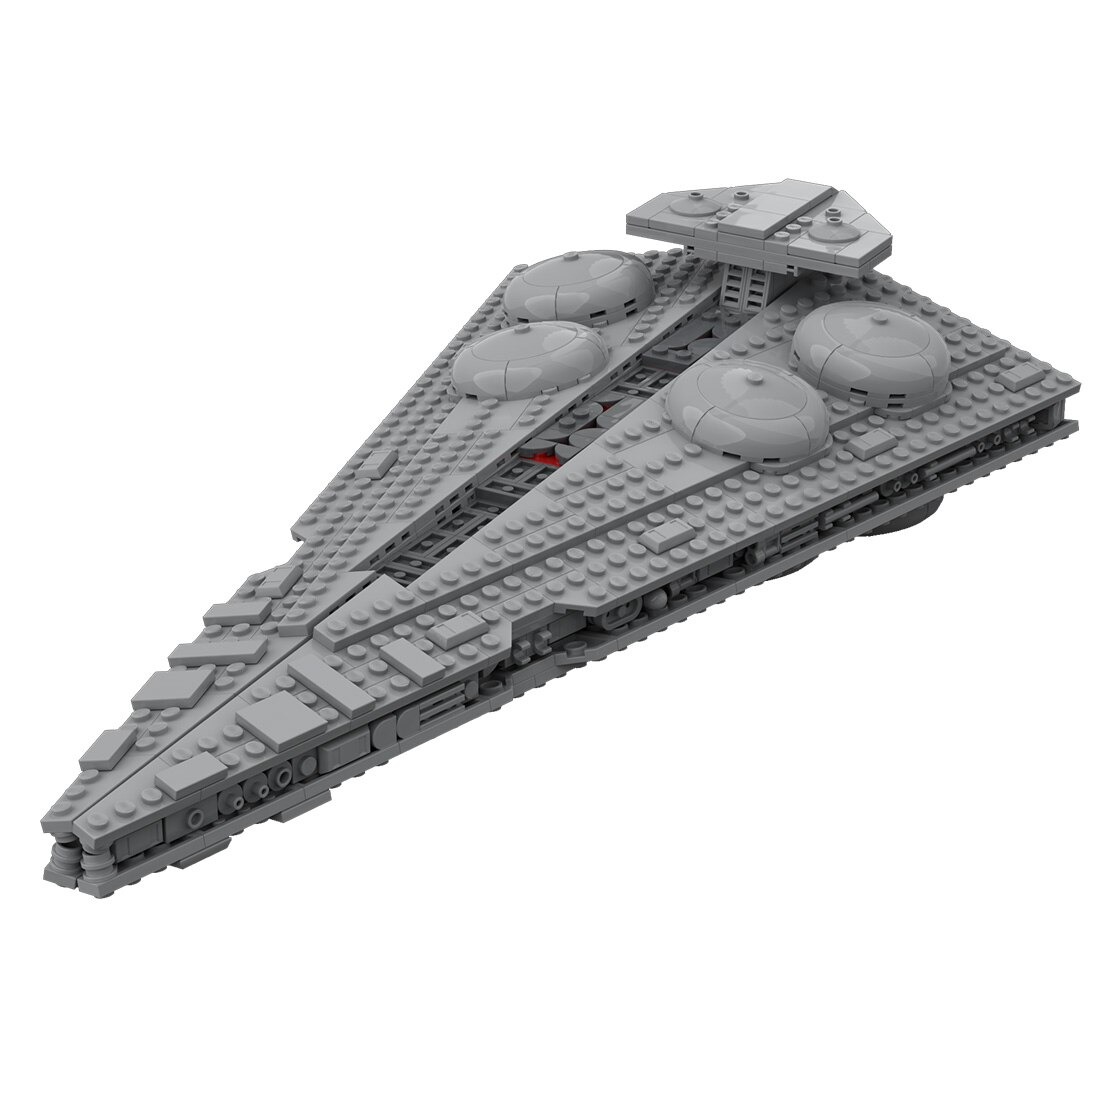 MOC-108178 Interdictor-class Star Destroyer With 922PCS